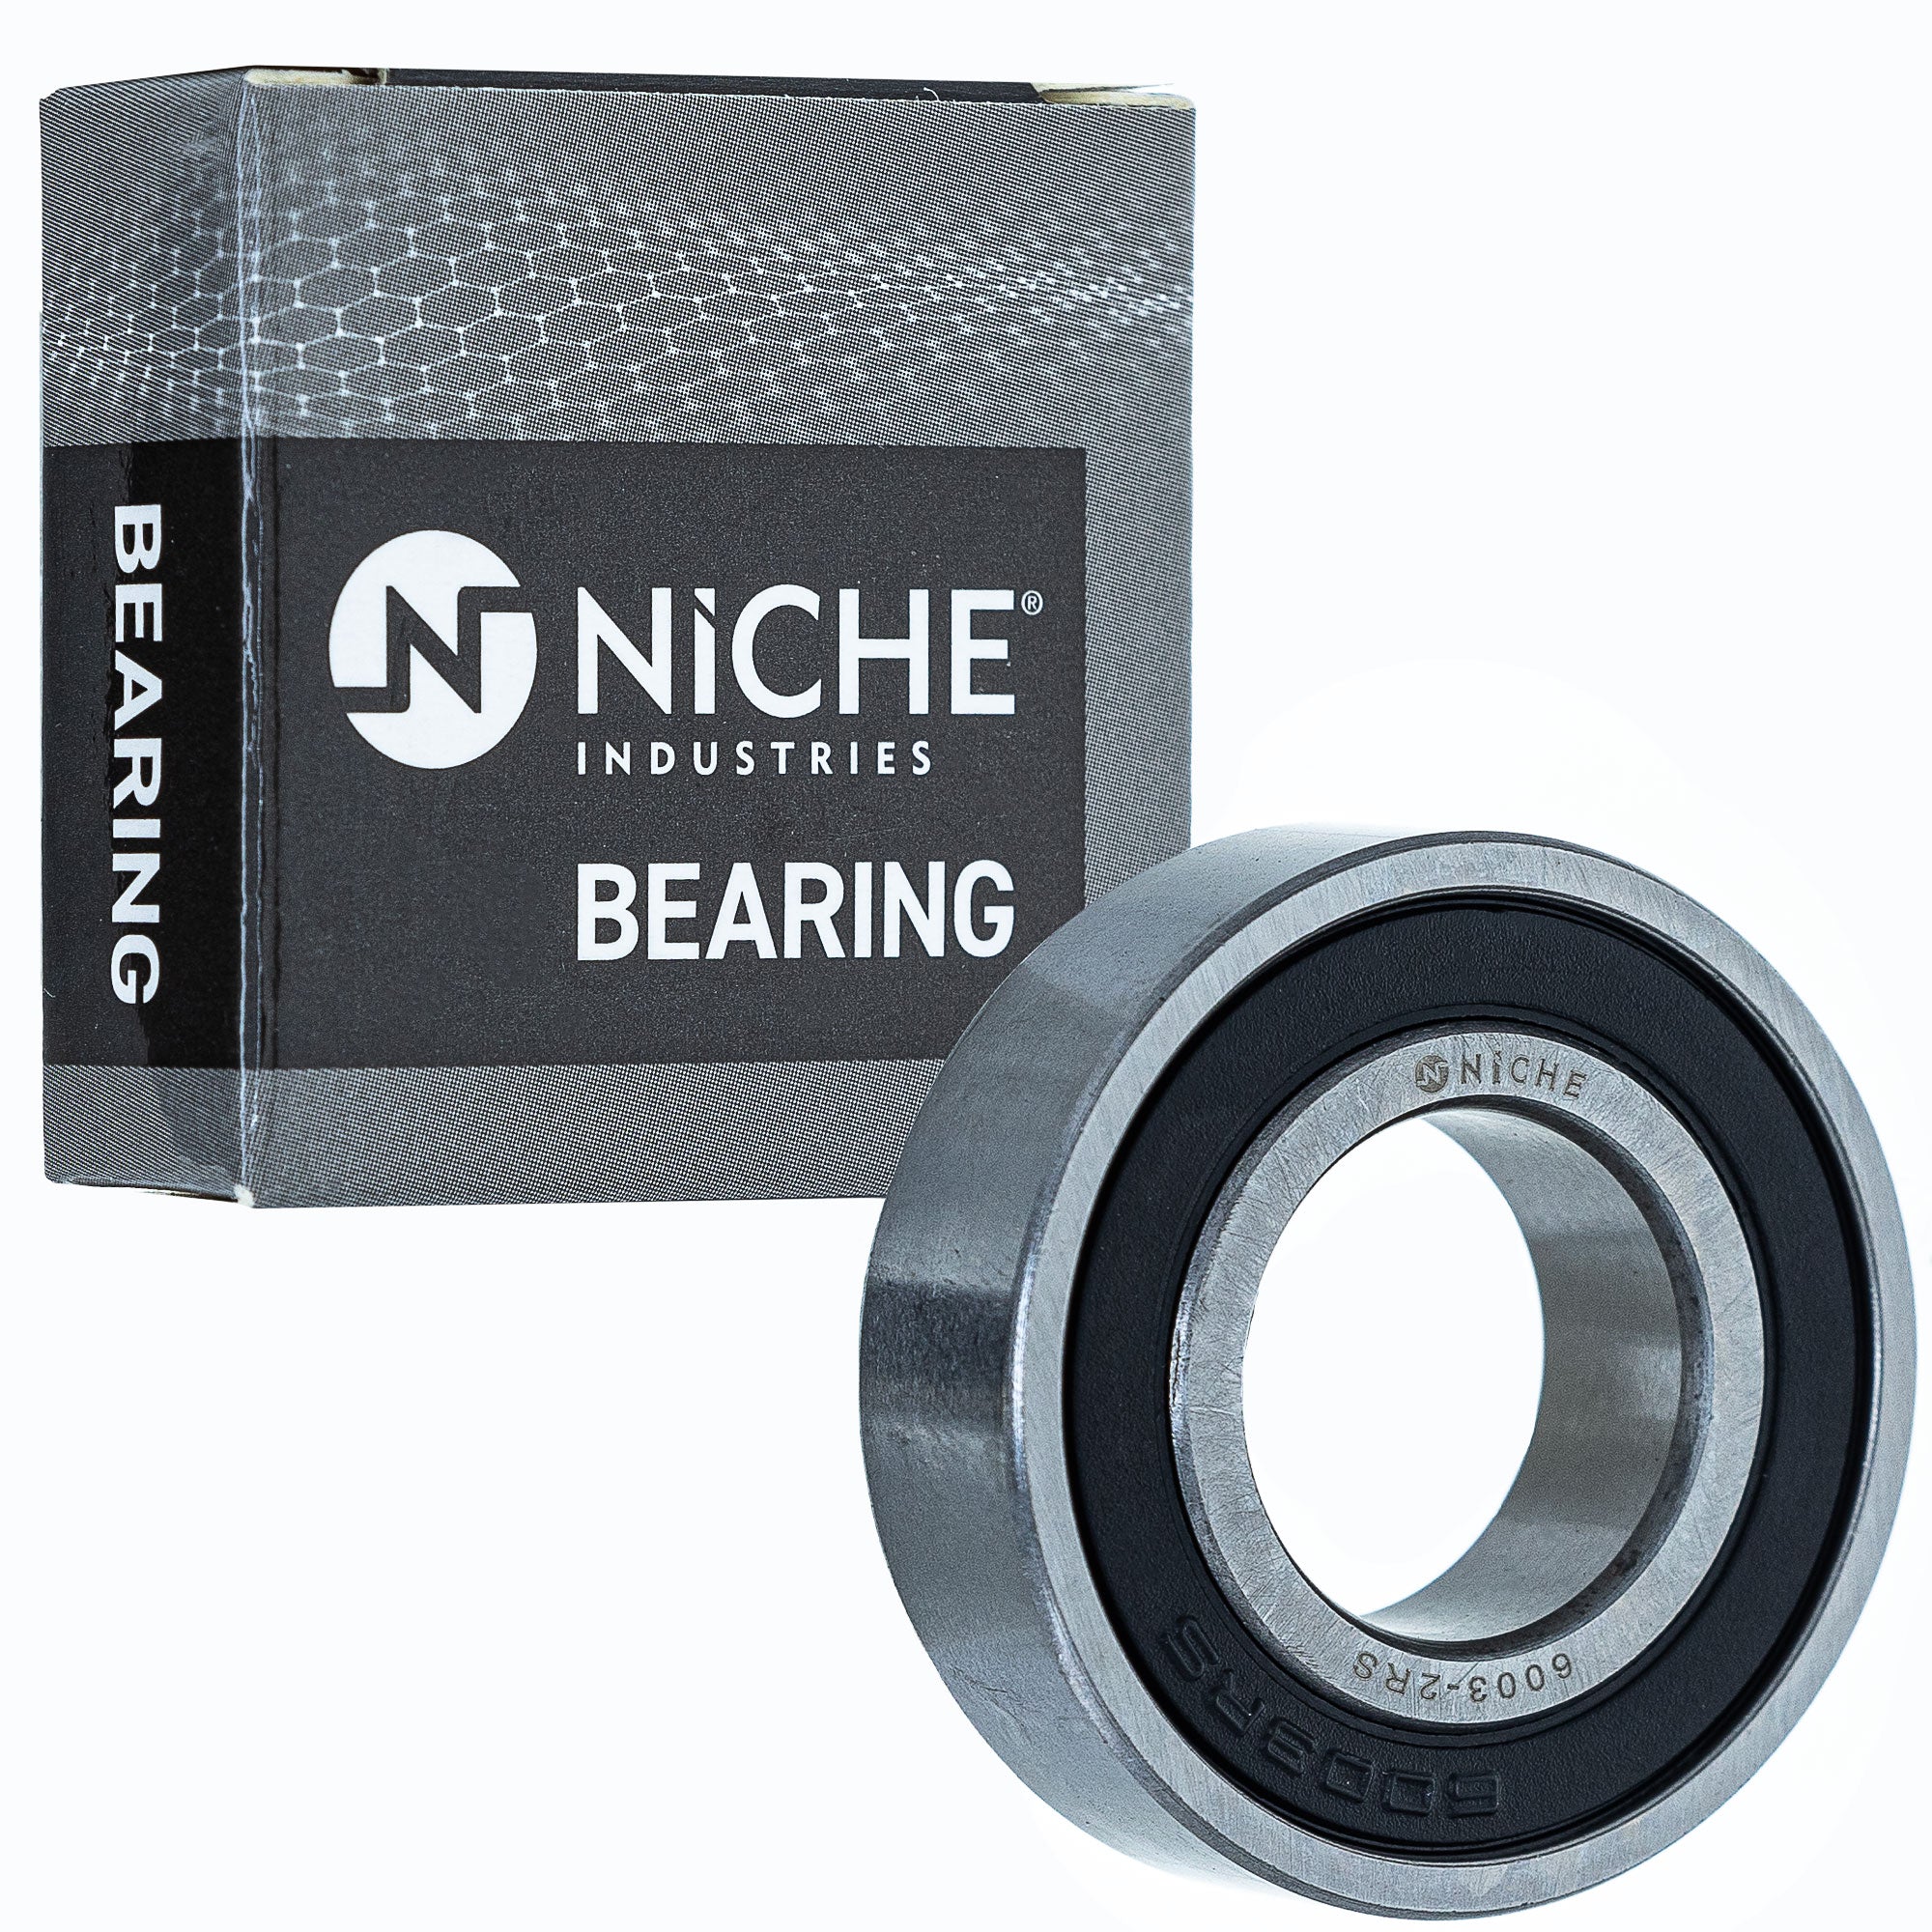 NICHE 519-CBB2238R Bearing & Seal Kit 2-Pack for zOTHER Arctic Cat